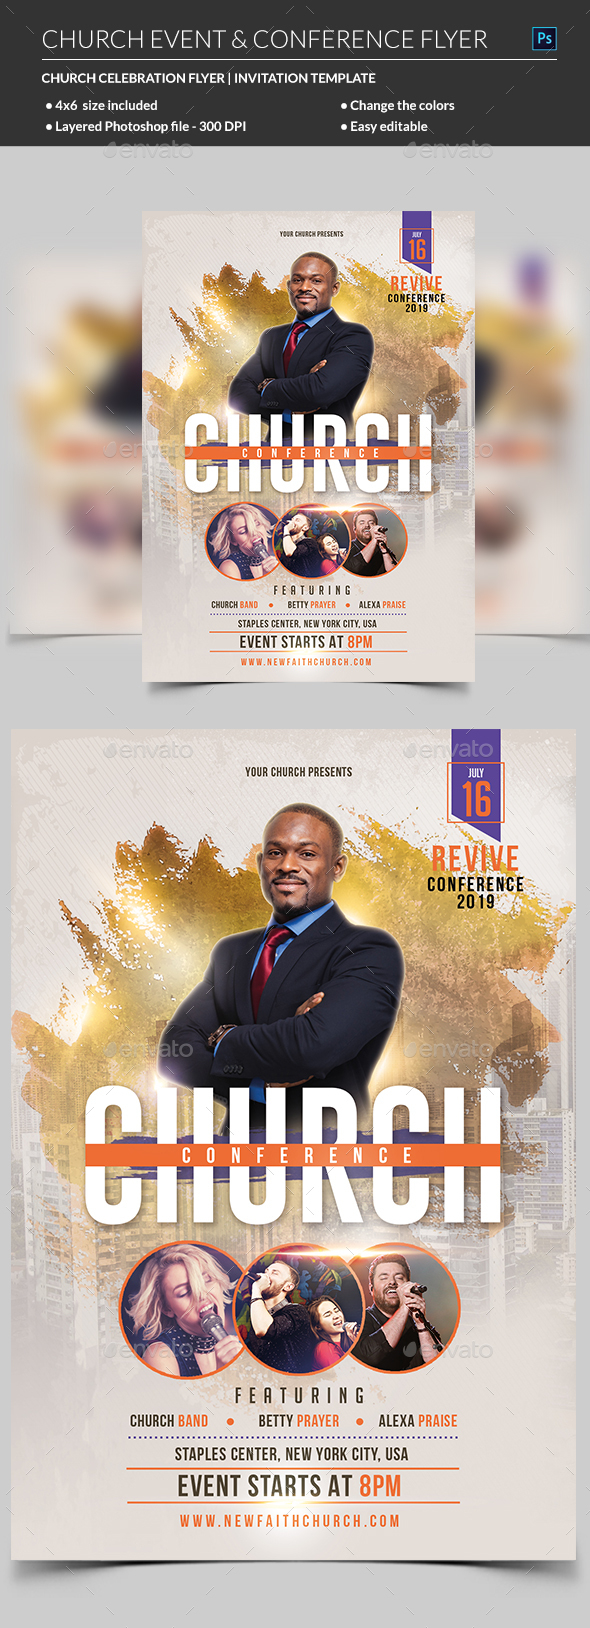 Church Event Or Conference Flyer Template For Church Conference Flyer Template